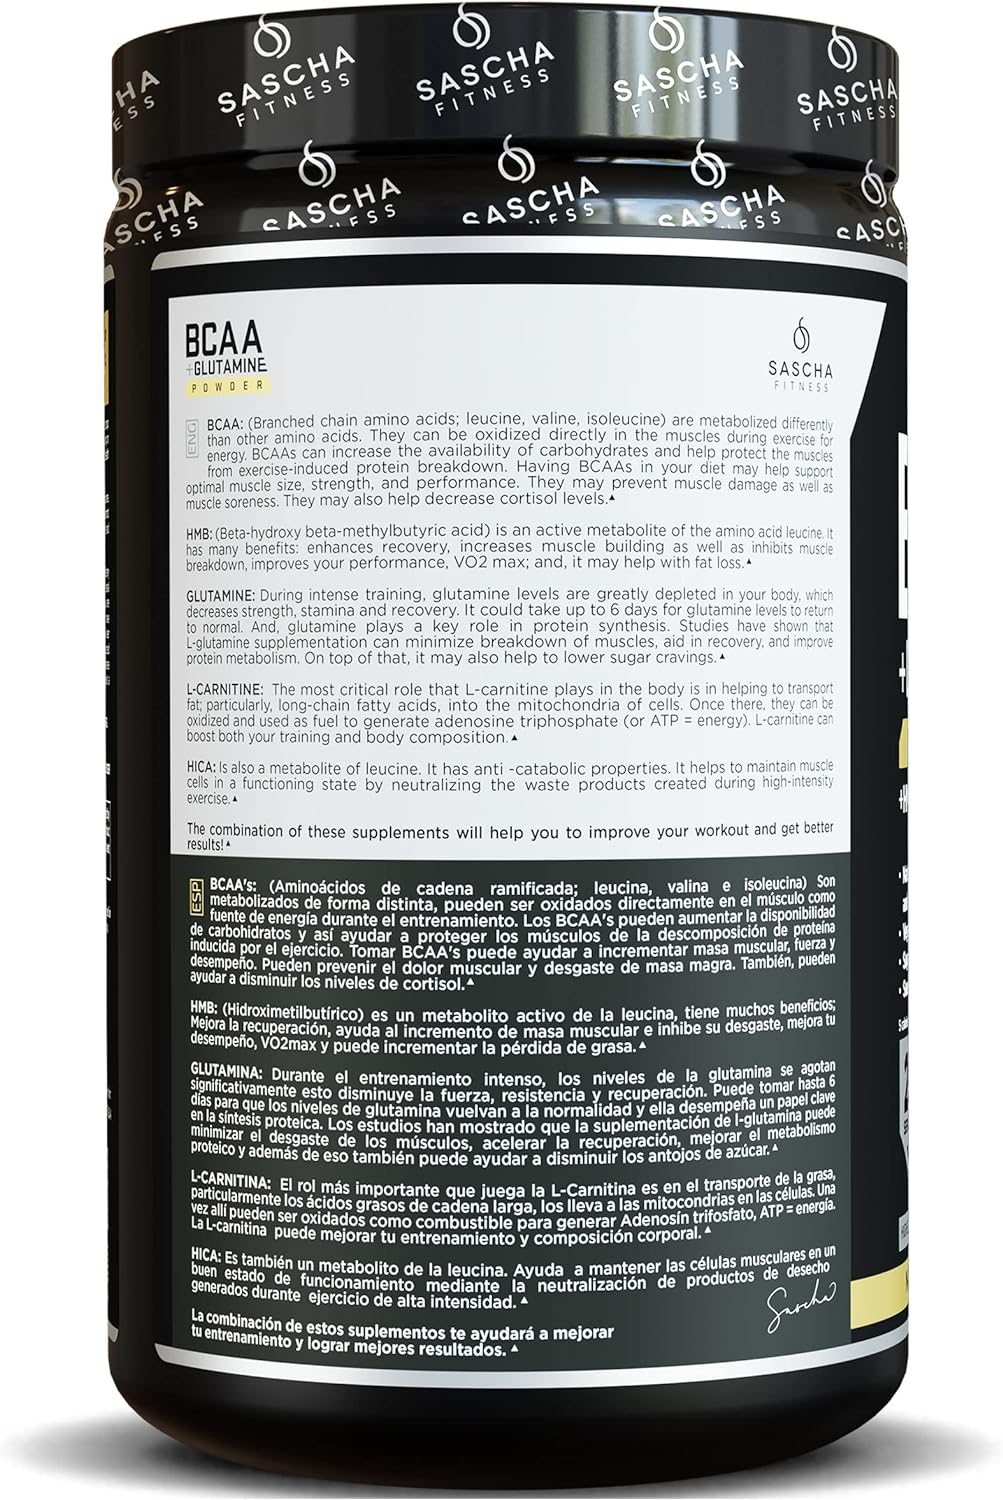 SASCHA FITNESS BCAA 4:1:1 + Glutamine, HMB, L-Carnitine, HICA | Powerful and Instant Powder Blend with Branched Chain Amino Acids (BCAAs) for Pre, Intra and Post-Workout | Natural Piña Colada,362.5g : Health & Household